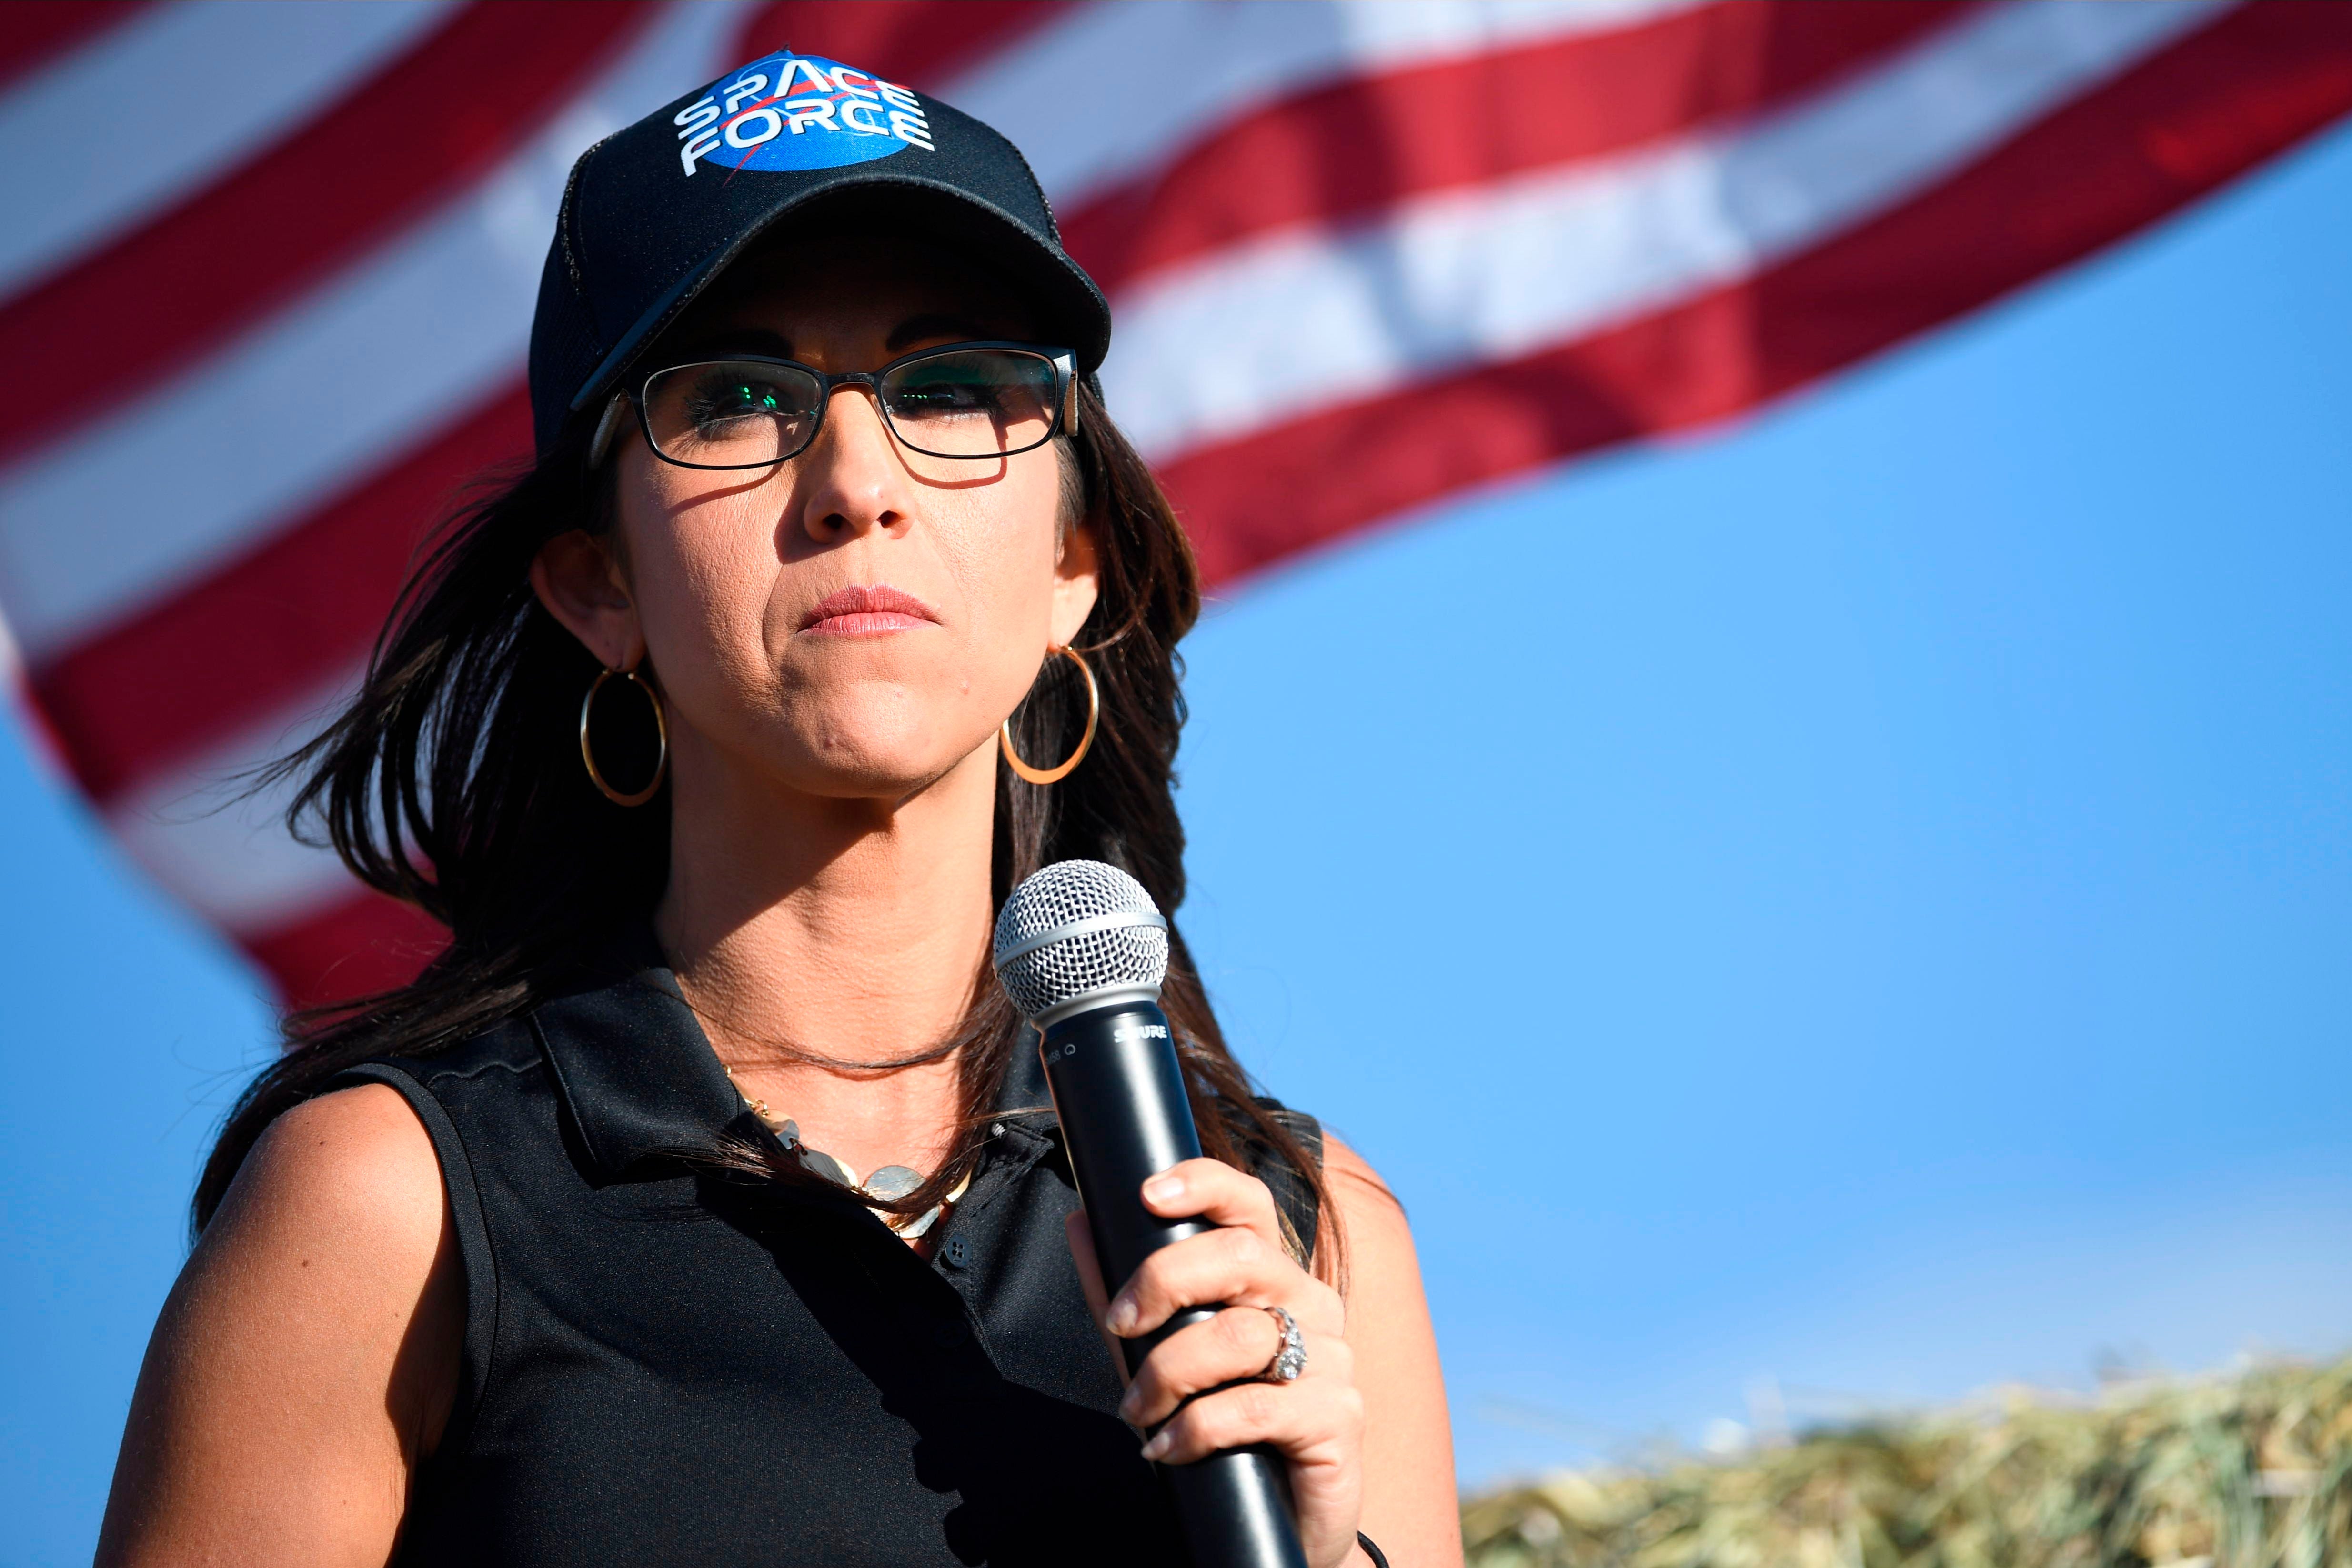 <p>File Image: Lauren Boebert, the Republican candidate for the US House of Representatives seat in Colorado's 3rd Congressional District, addresses supporters during a campaign rally in Colona, Colorado on 10 October 2020</p>